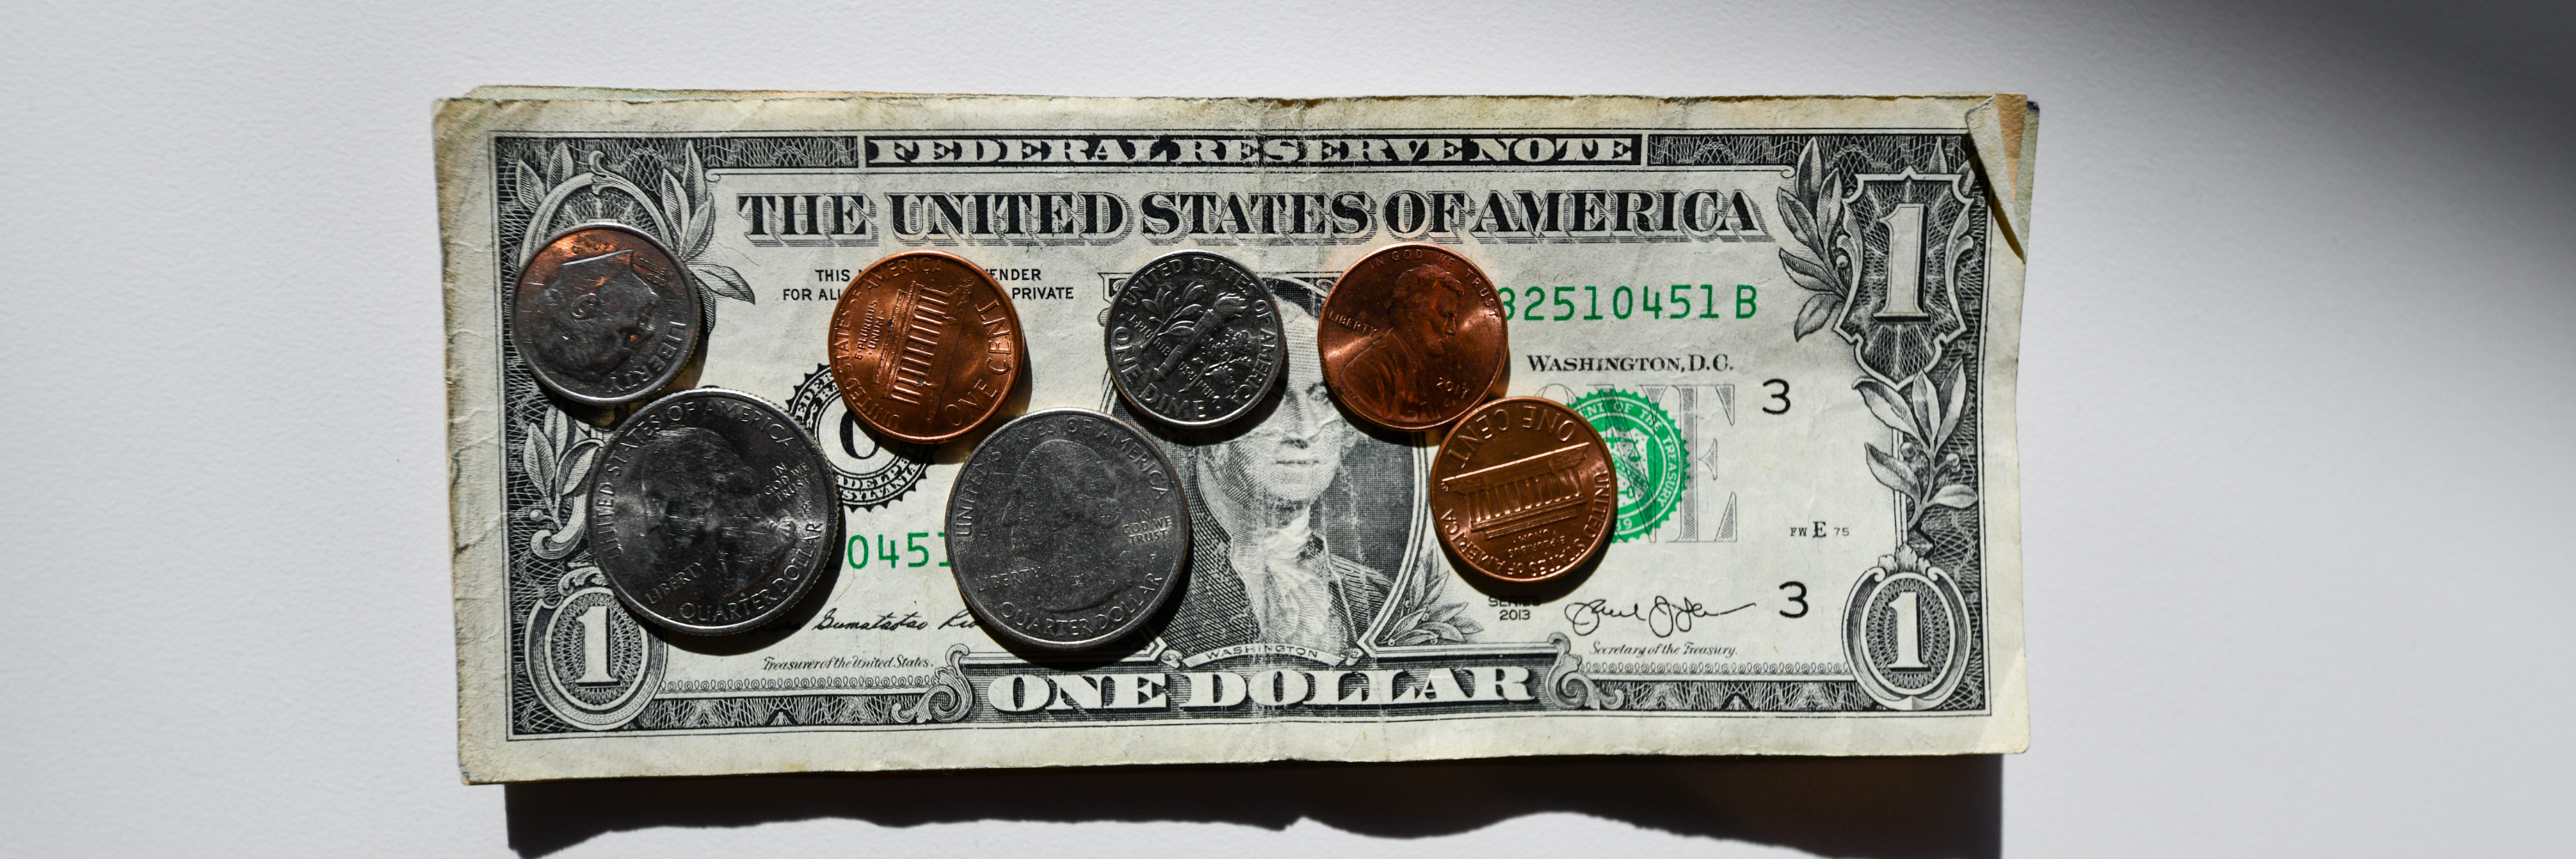 Us currency. Photo by Kenny Eliason